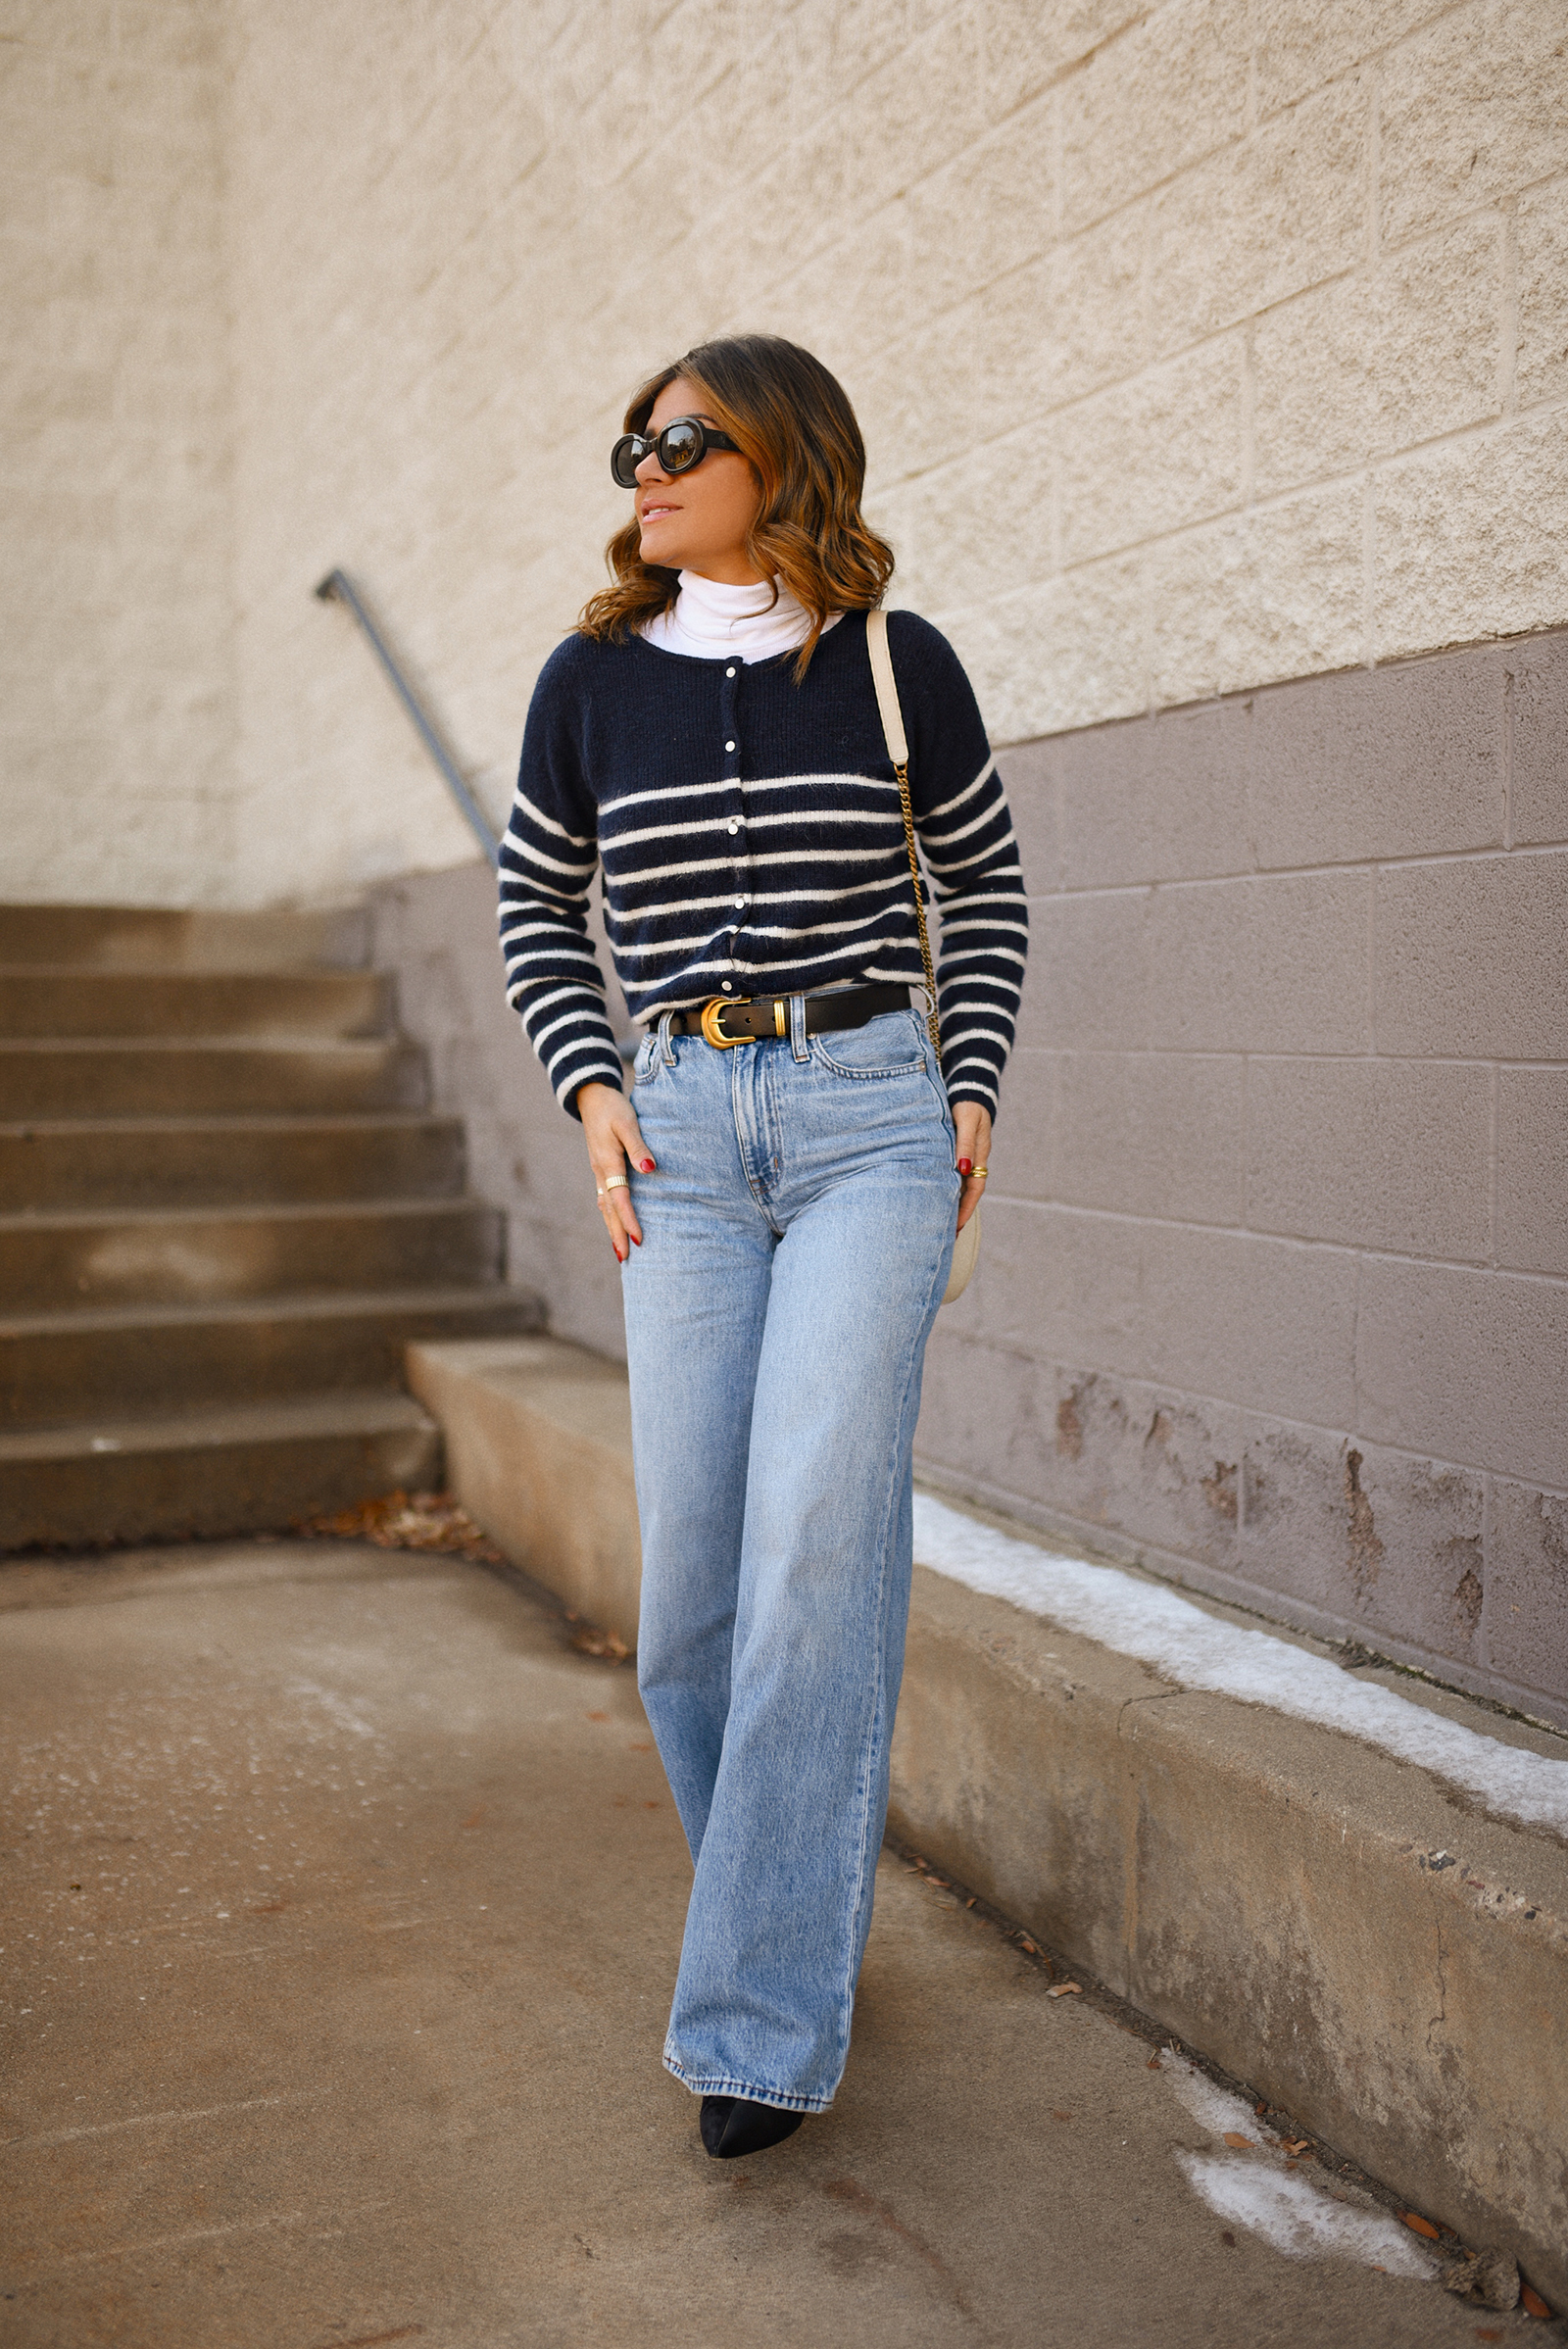 Carolina Hellal of Chic Talk wearing a Stripped cardigan from Sèzane, Madewell wide leg jeans and Yves Saint Laurent crossbody round camera bag